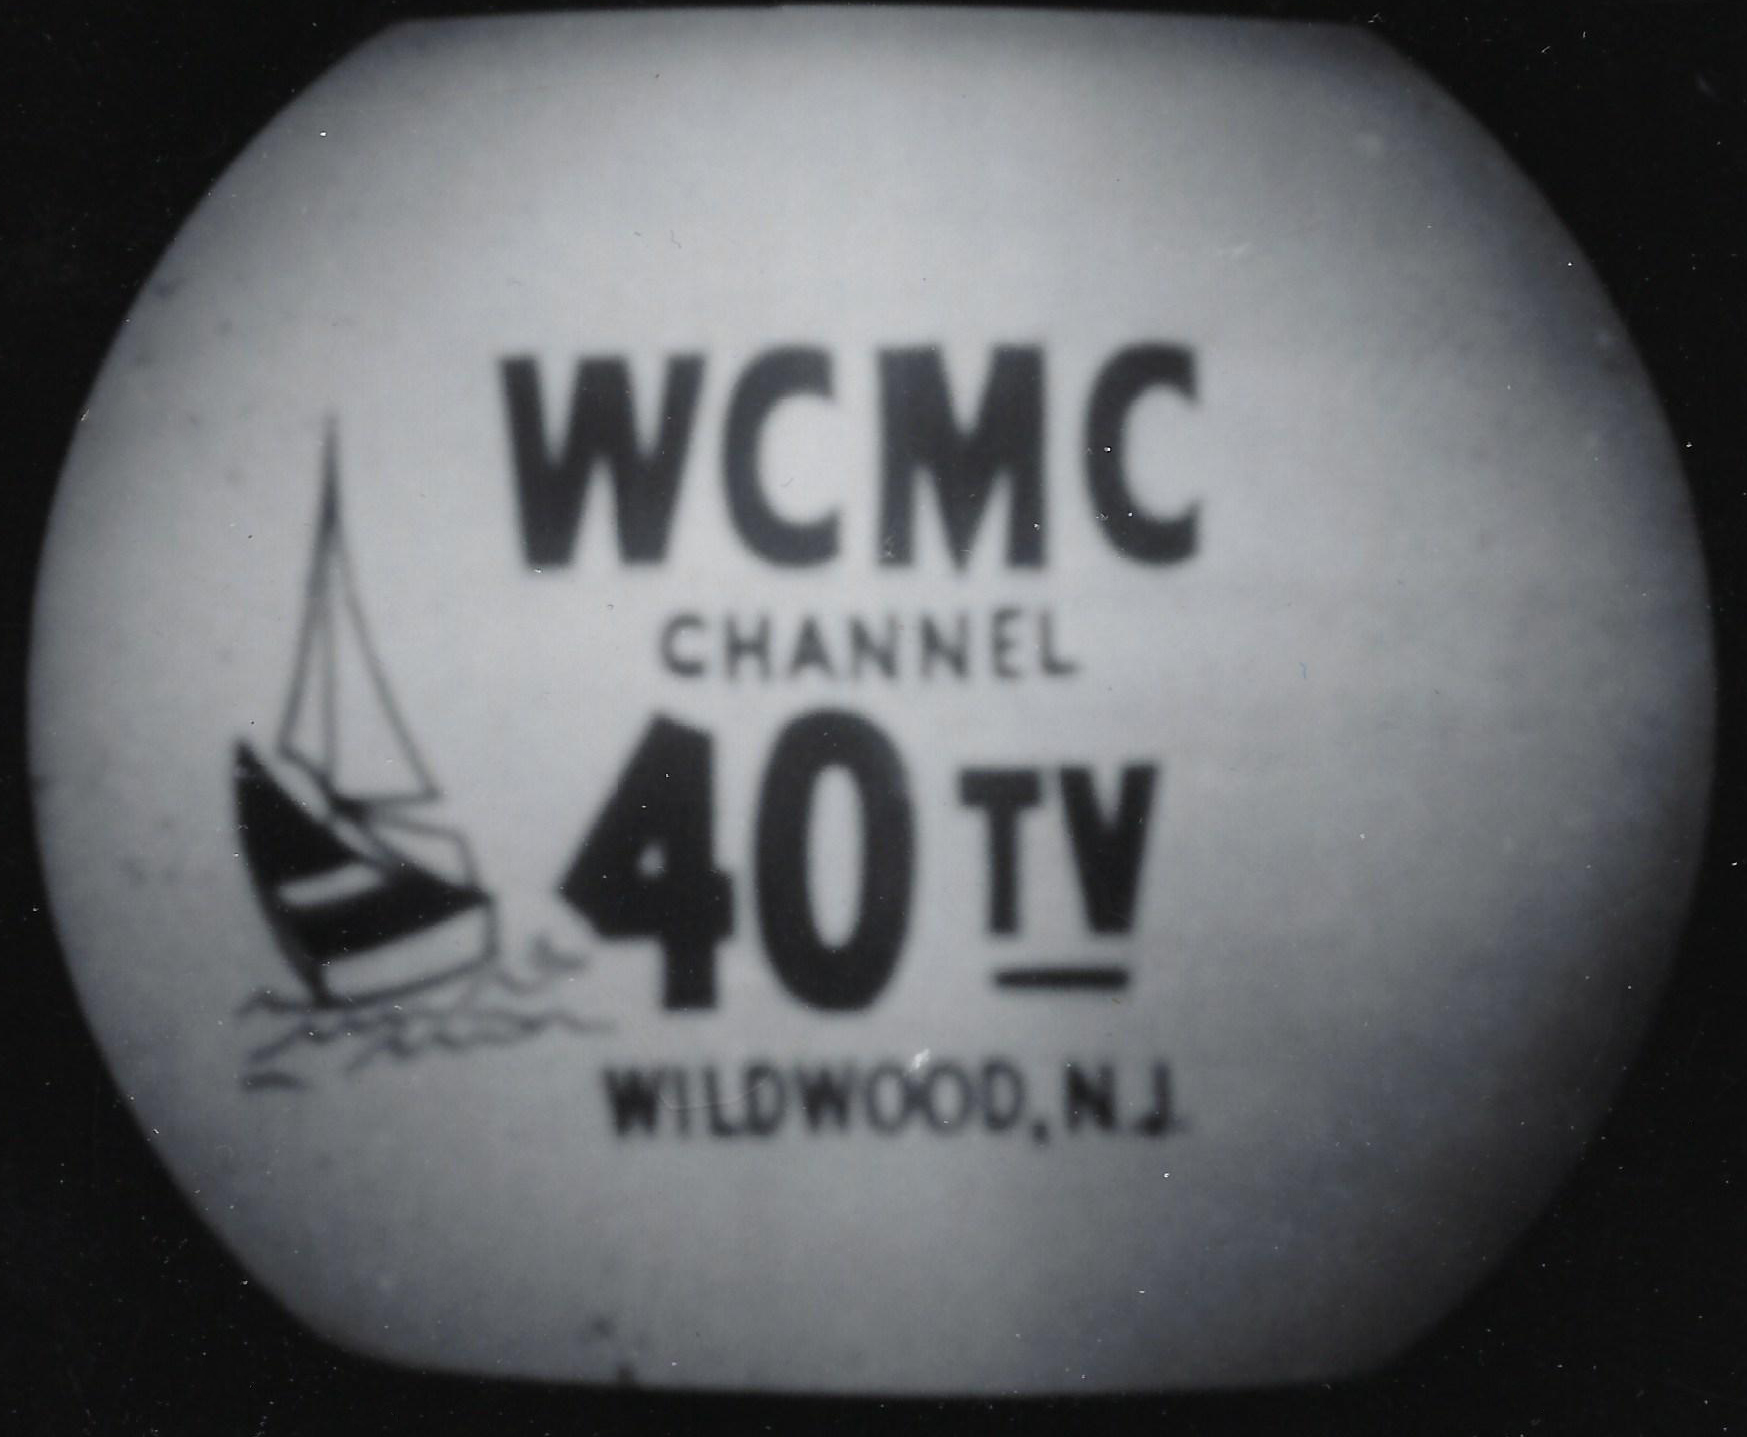 WCMC TV Channel 40 Wildwood, New Jersey